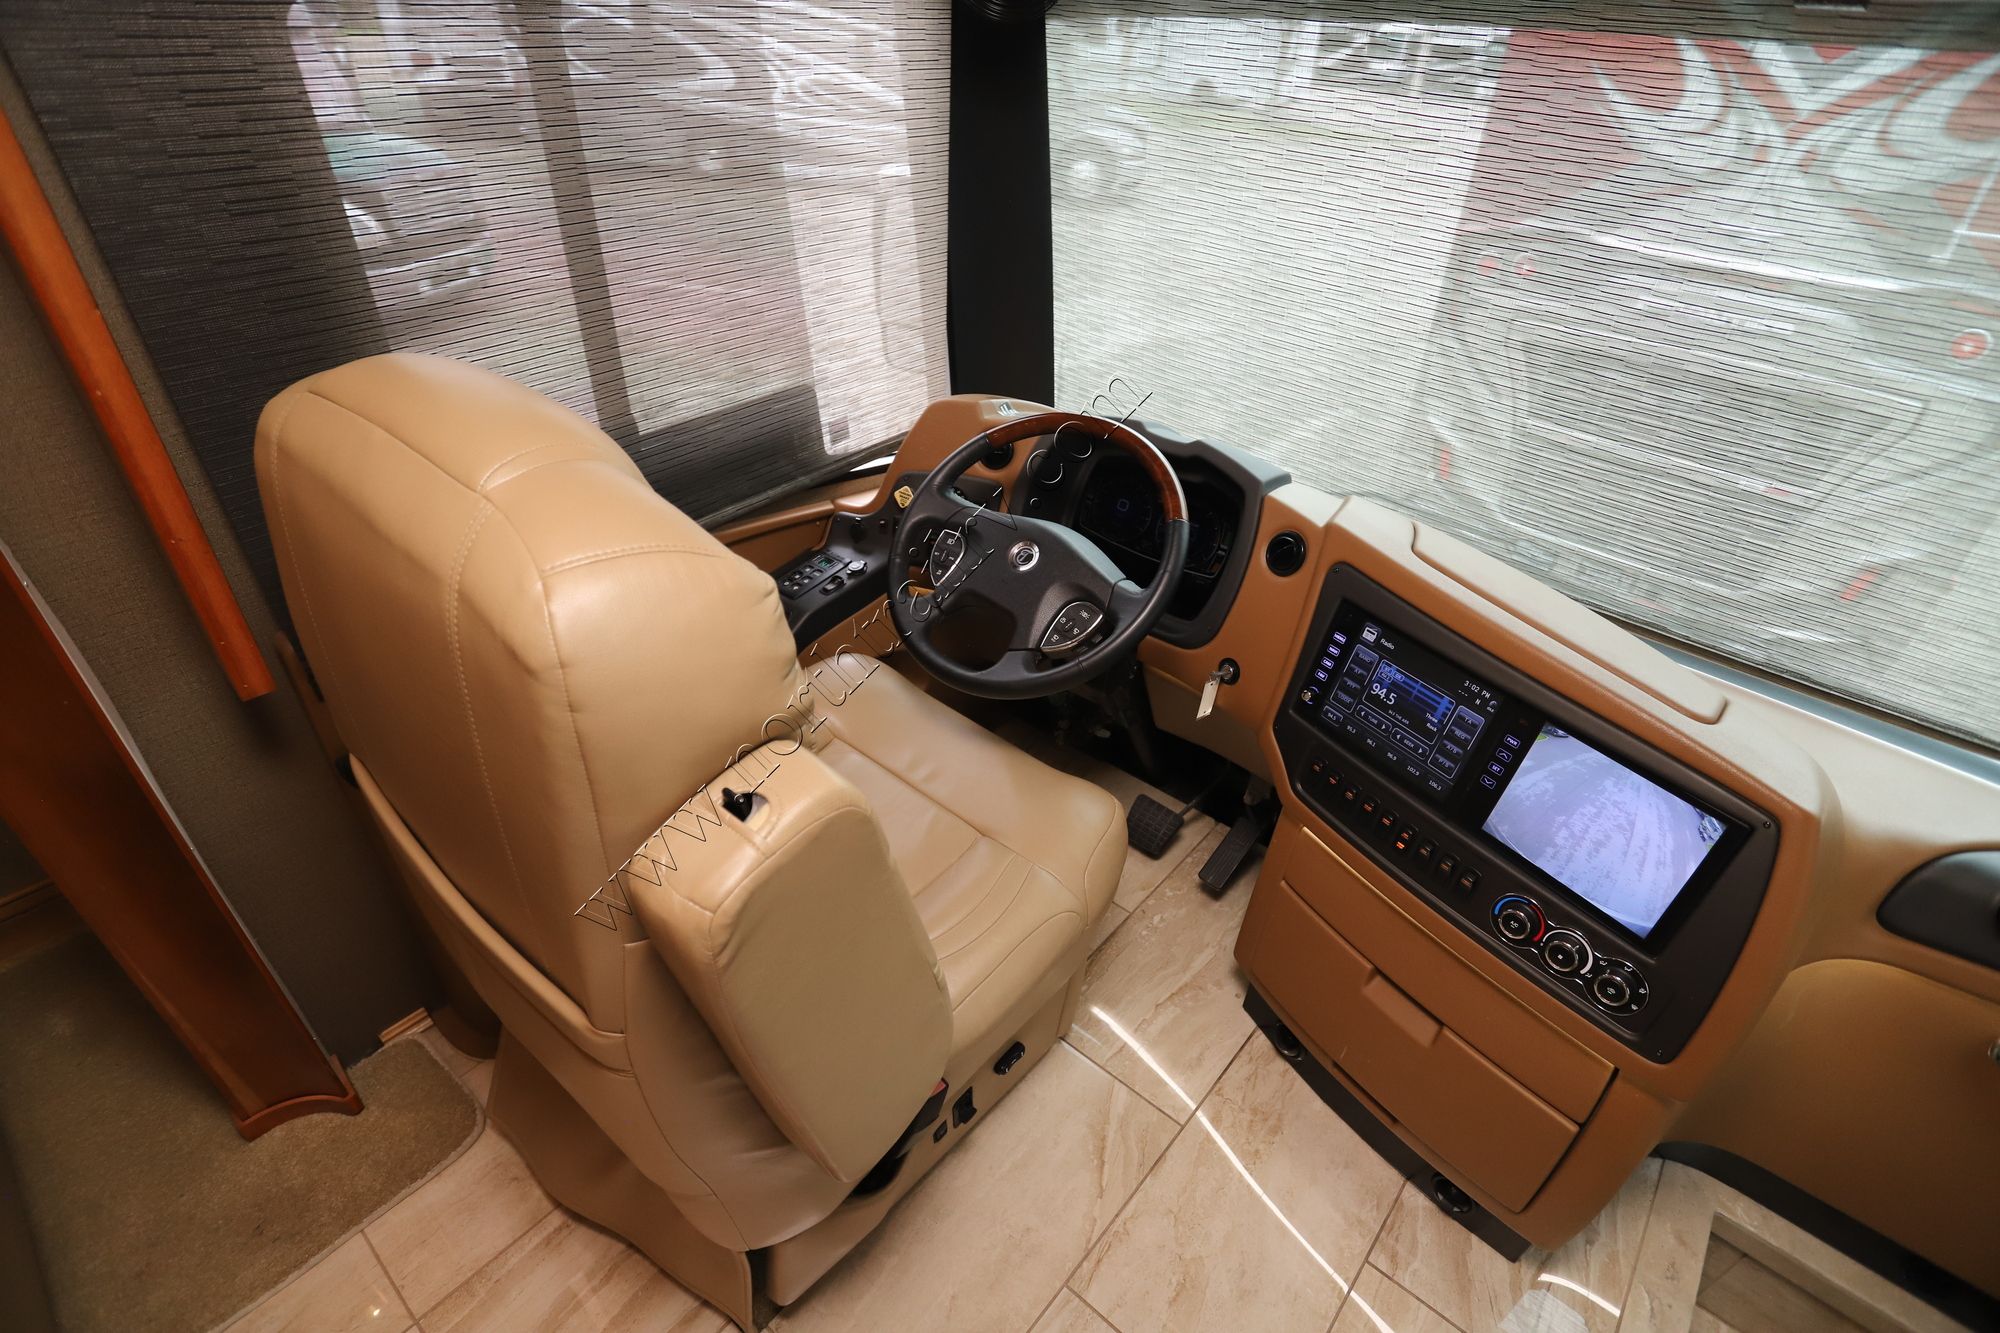 Used 2019 Tiffin Motor Homes Allegro Bus 45OPP Class A  For Sale